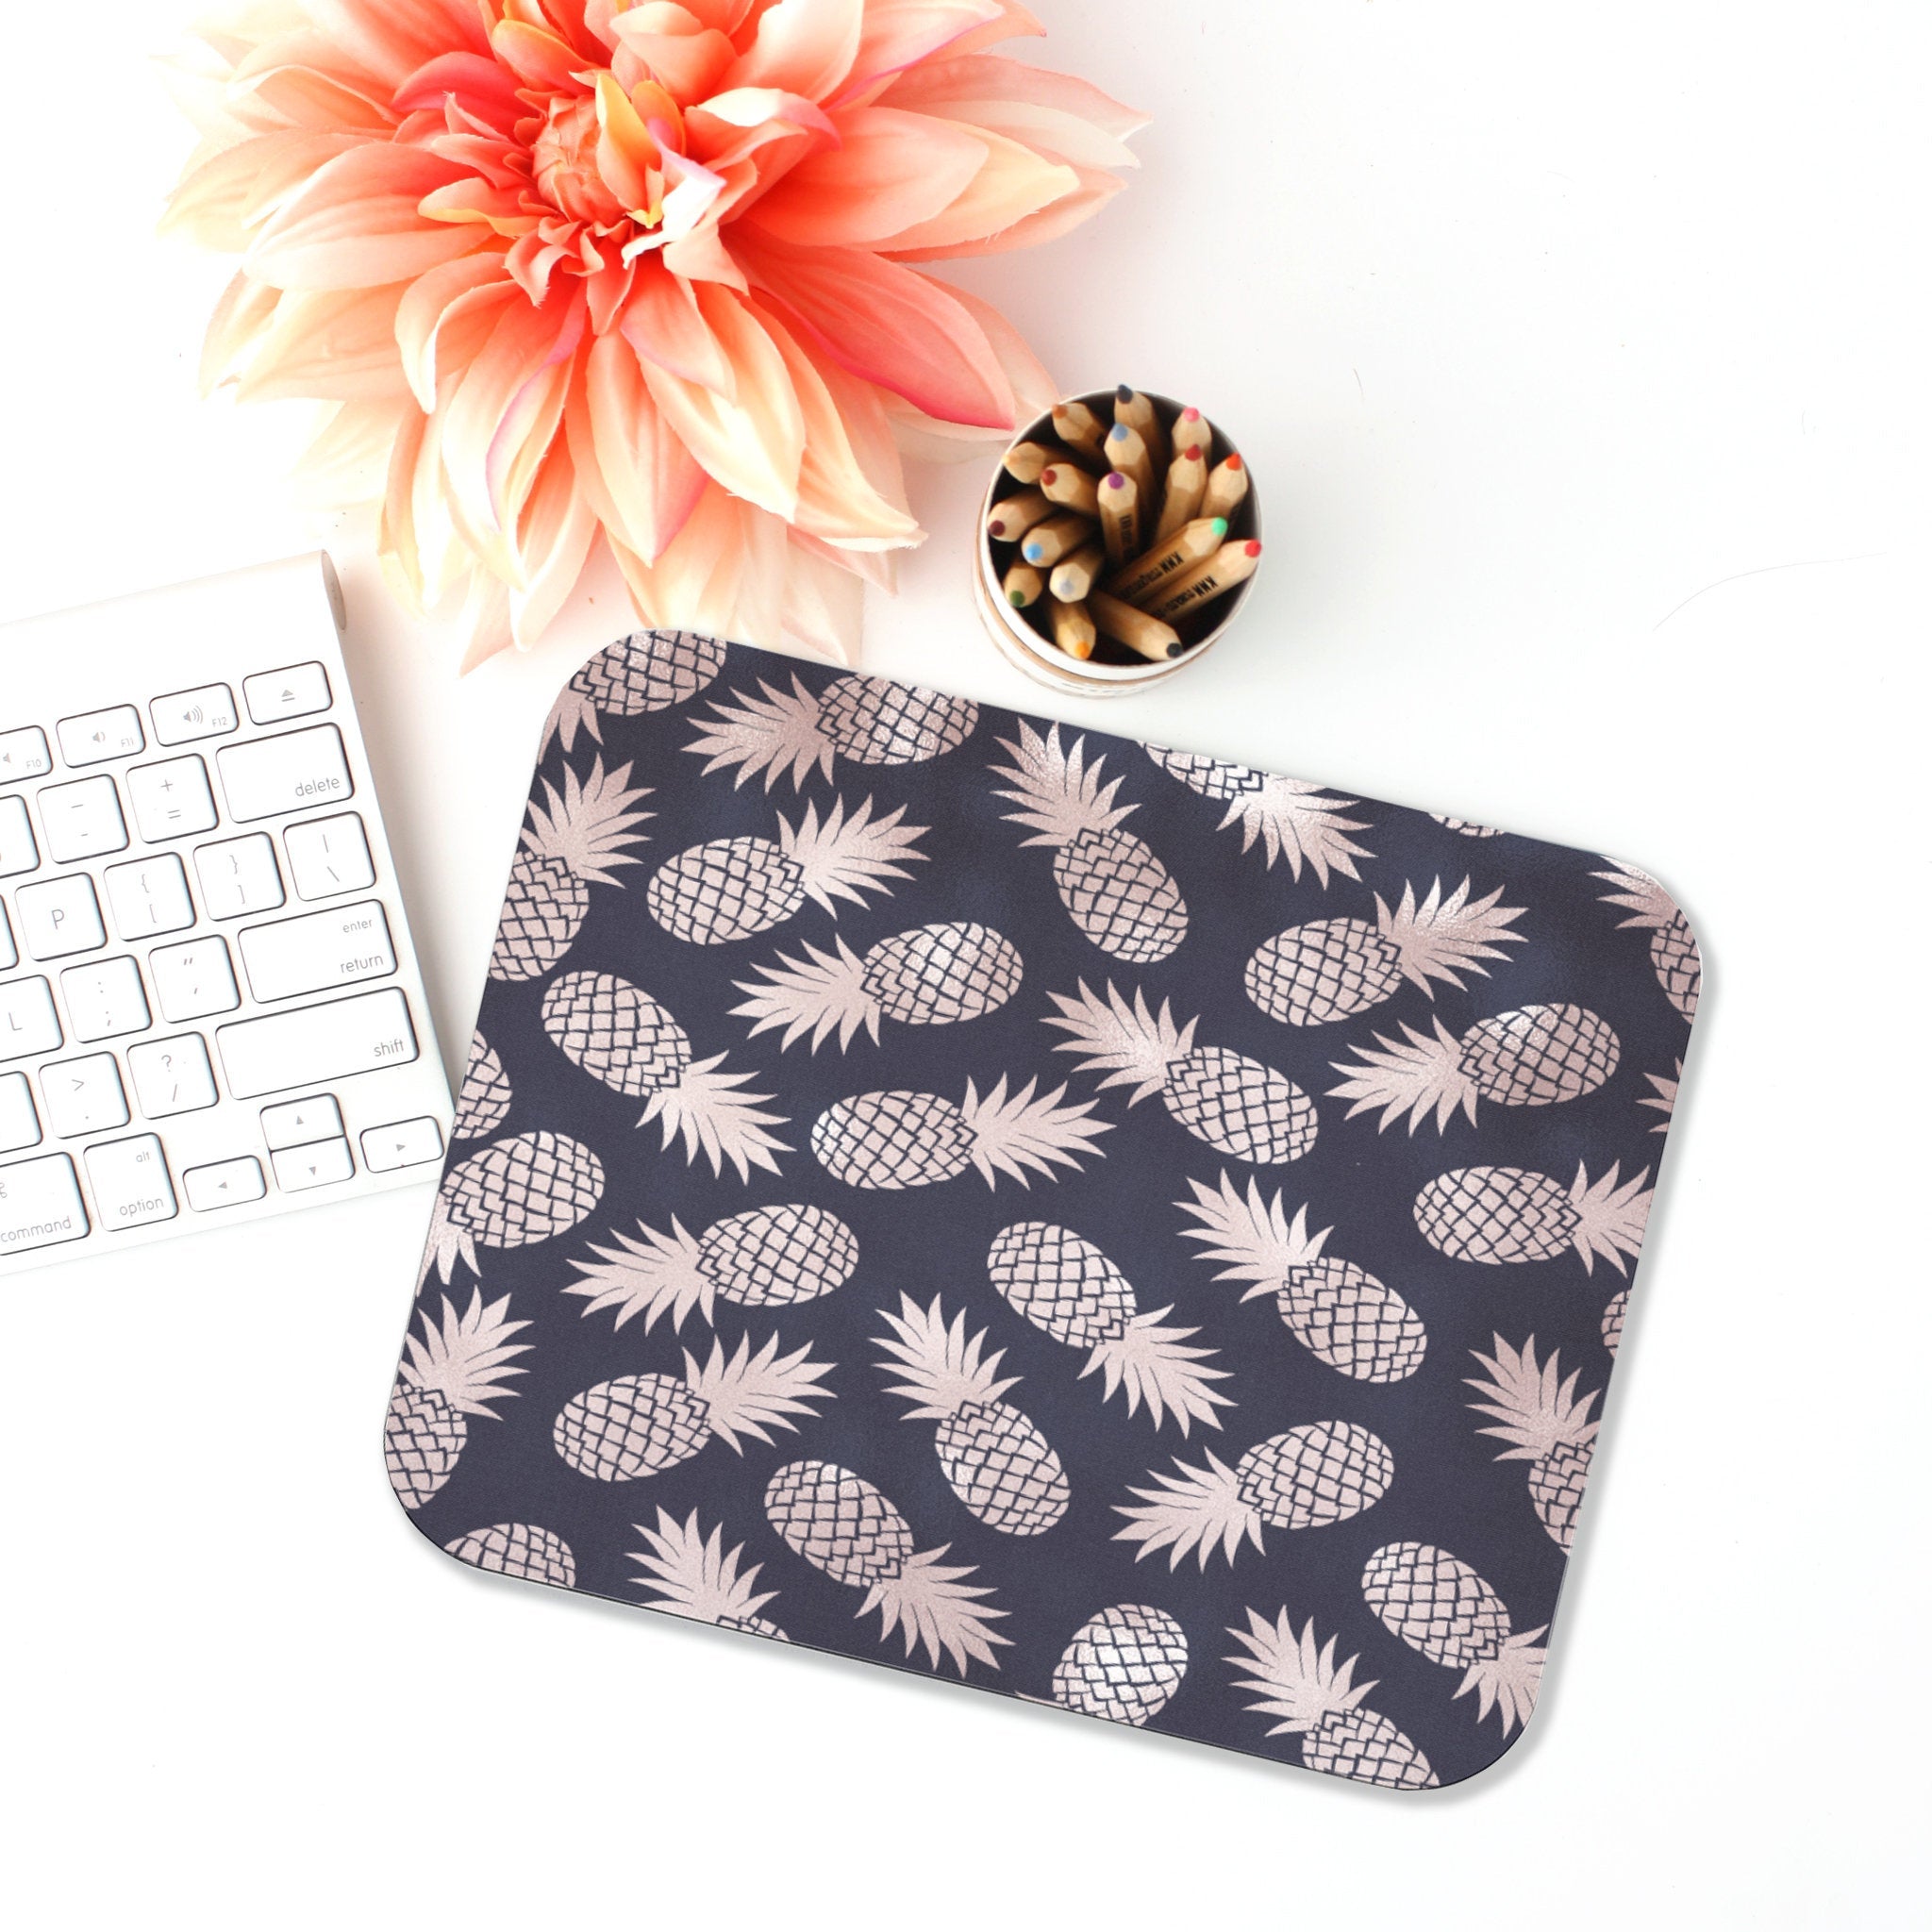 Pineapple Print Mouse Pad, Desk Accessories, Office Decor for